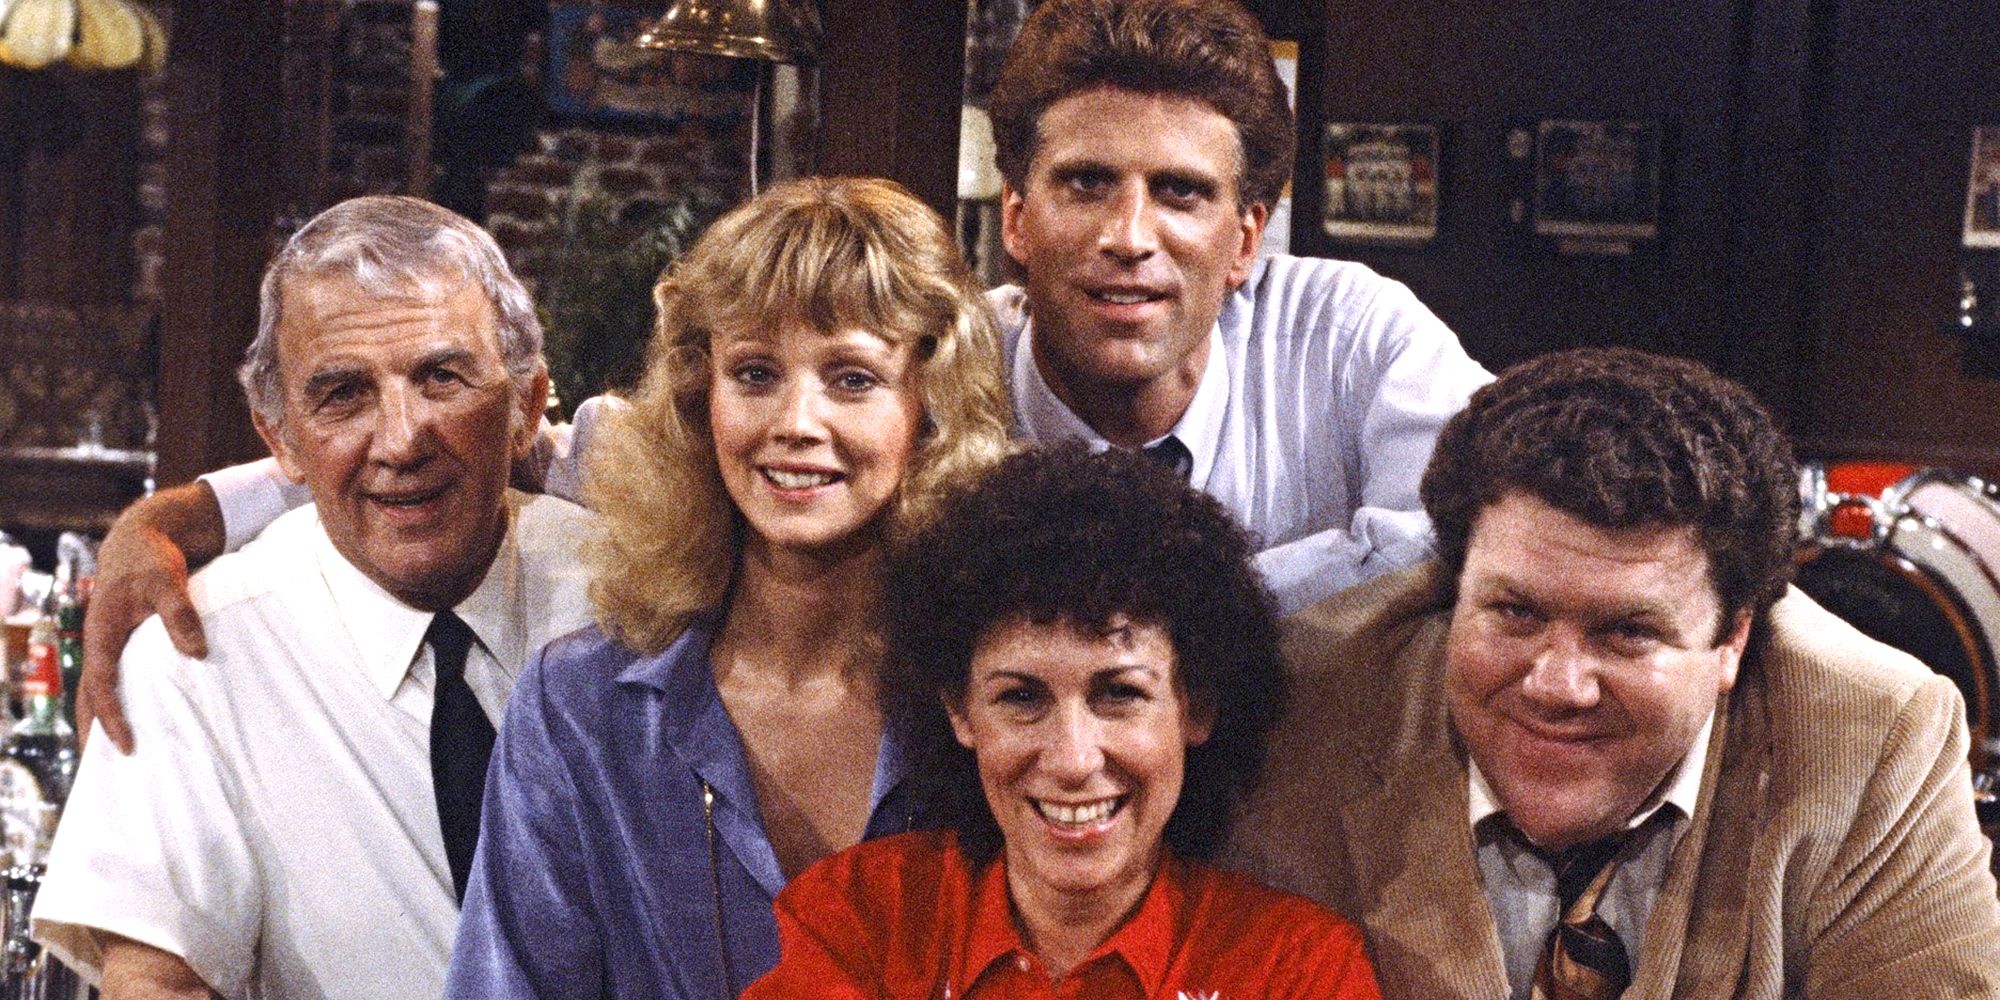 Shelley Long, Ted Danson, George Wendt, and other cast members of Cheers